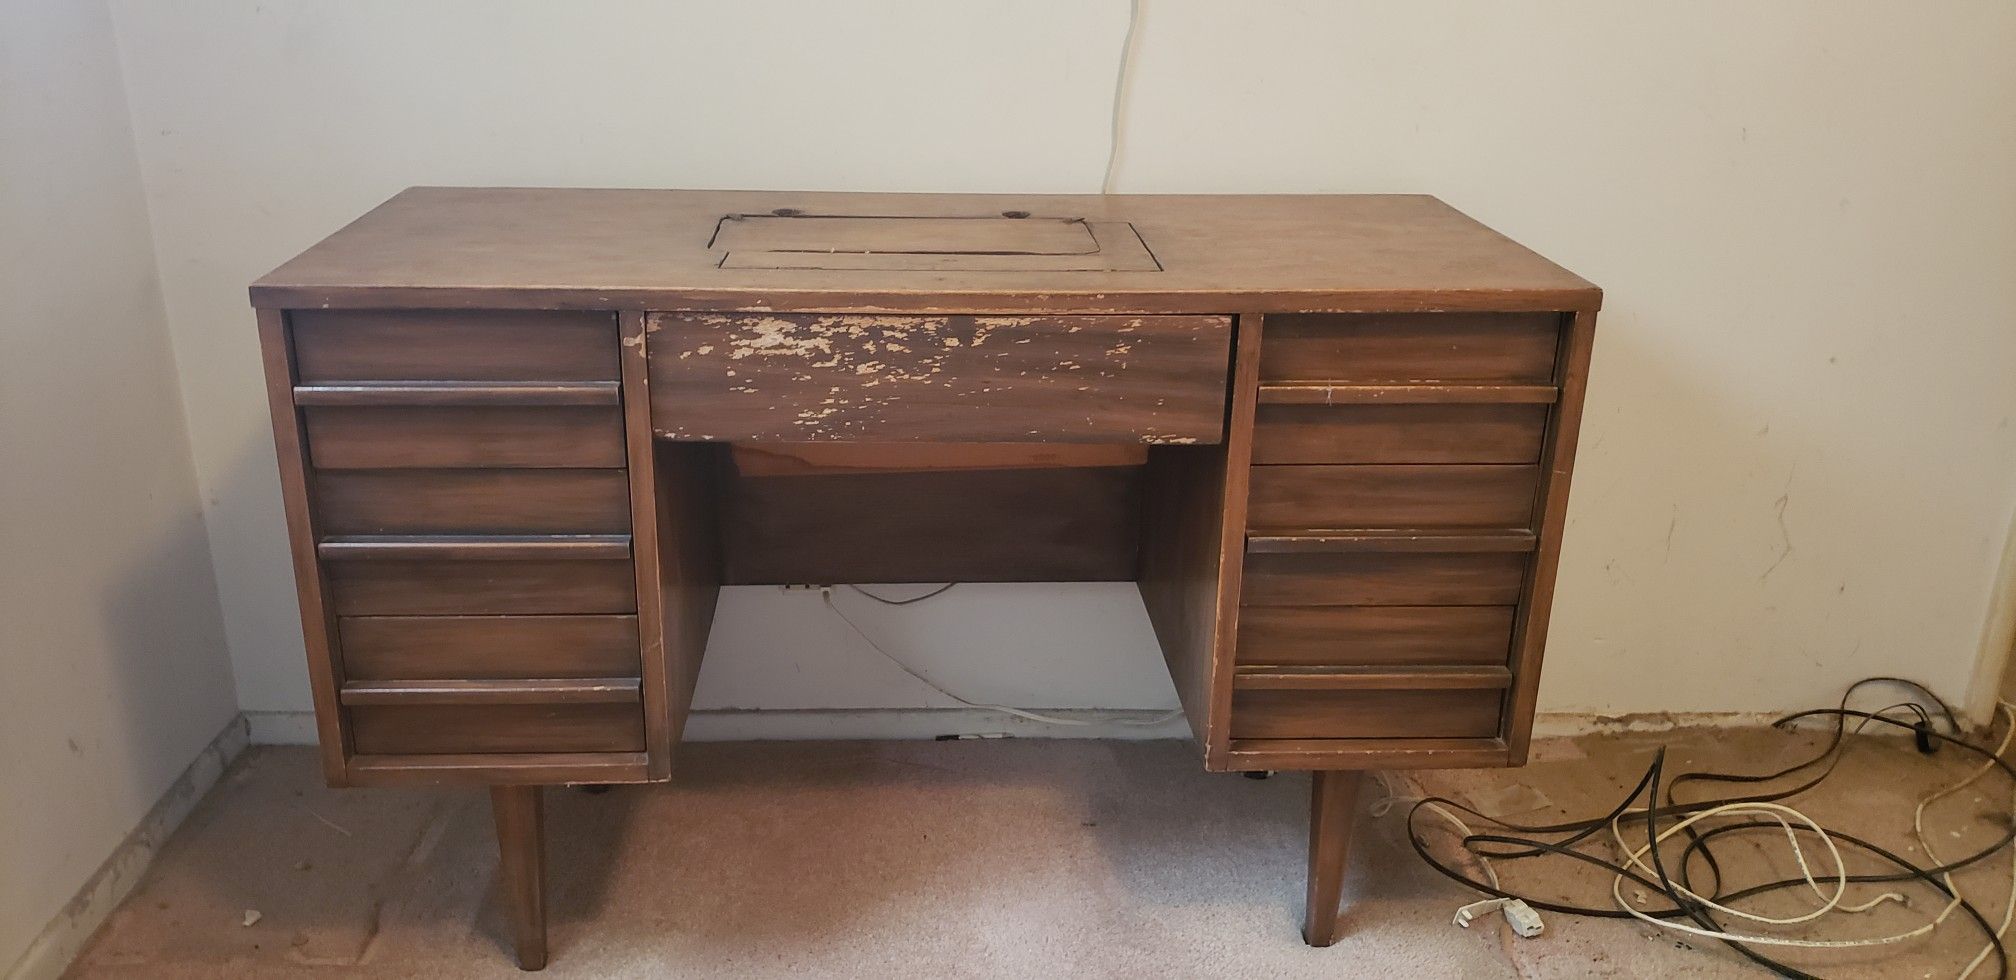 Antique vintage sewing desk. Needs some tender loving care, will be beautiful when restored!